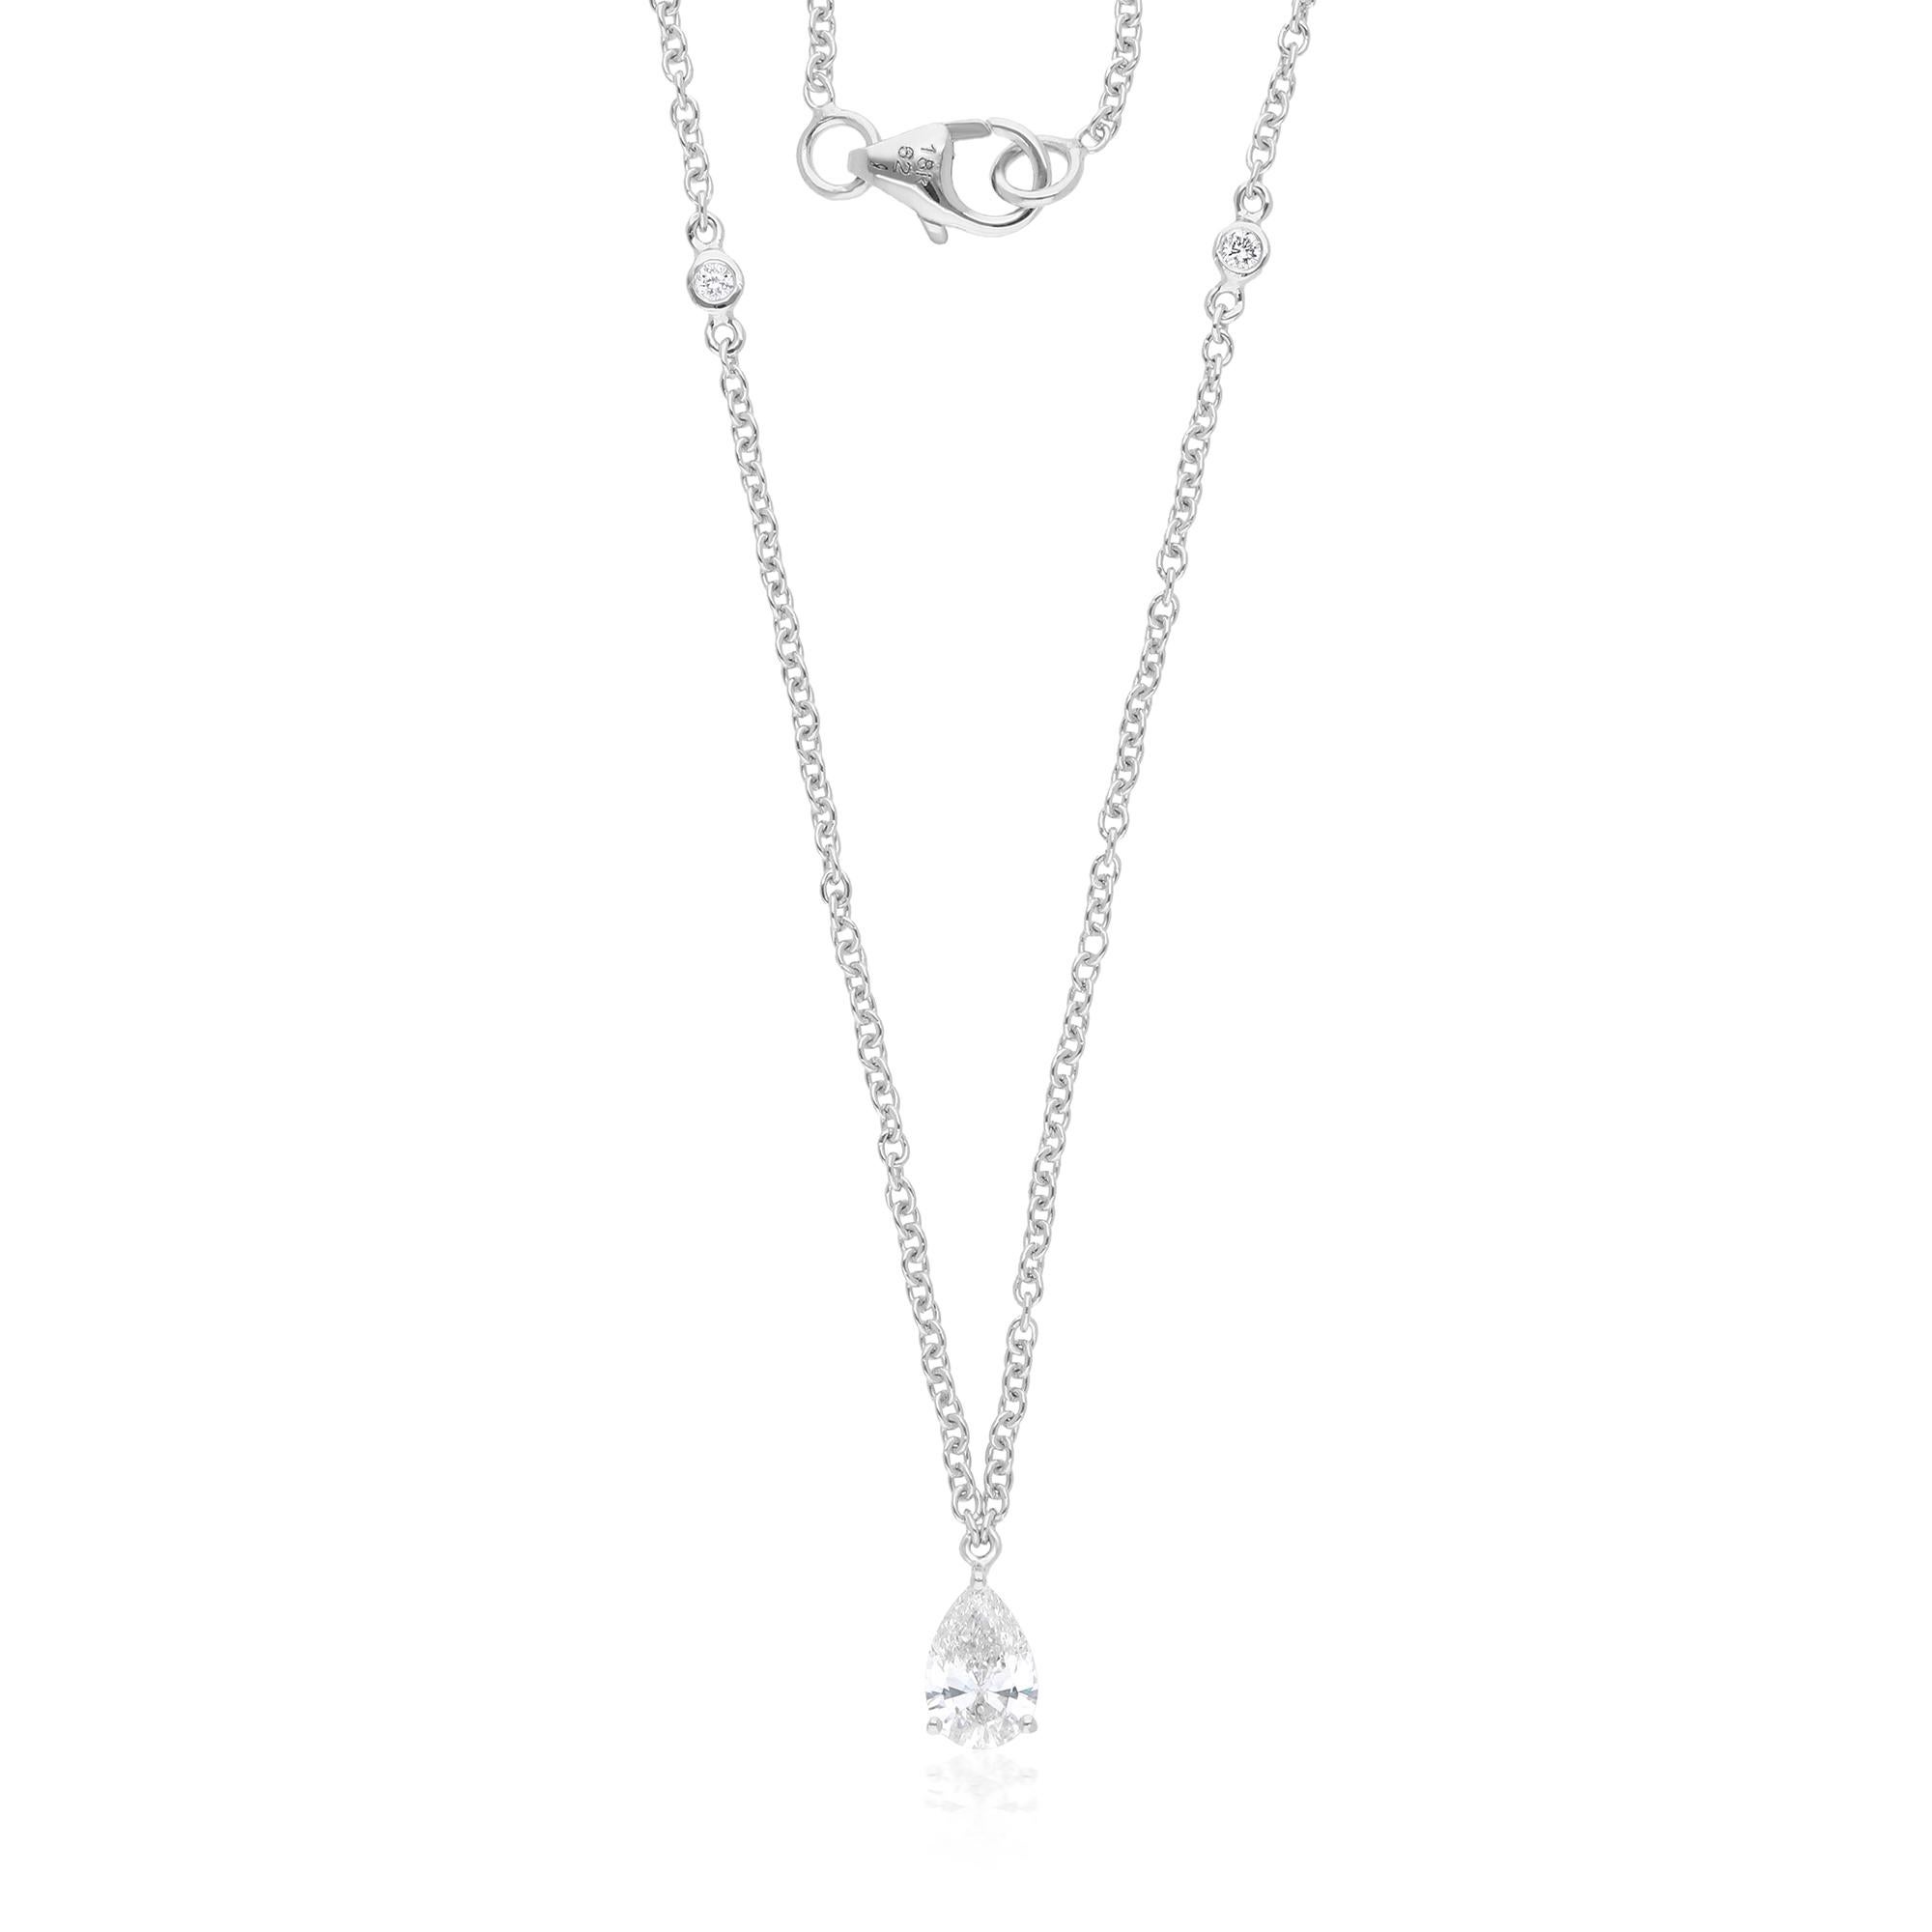 Women's Natural 0.57 Ct. Pear & Round Diamond Chain Necklace 14 Karat White Gold Jewelry For Sale